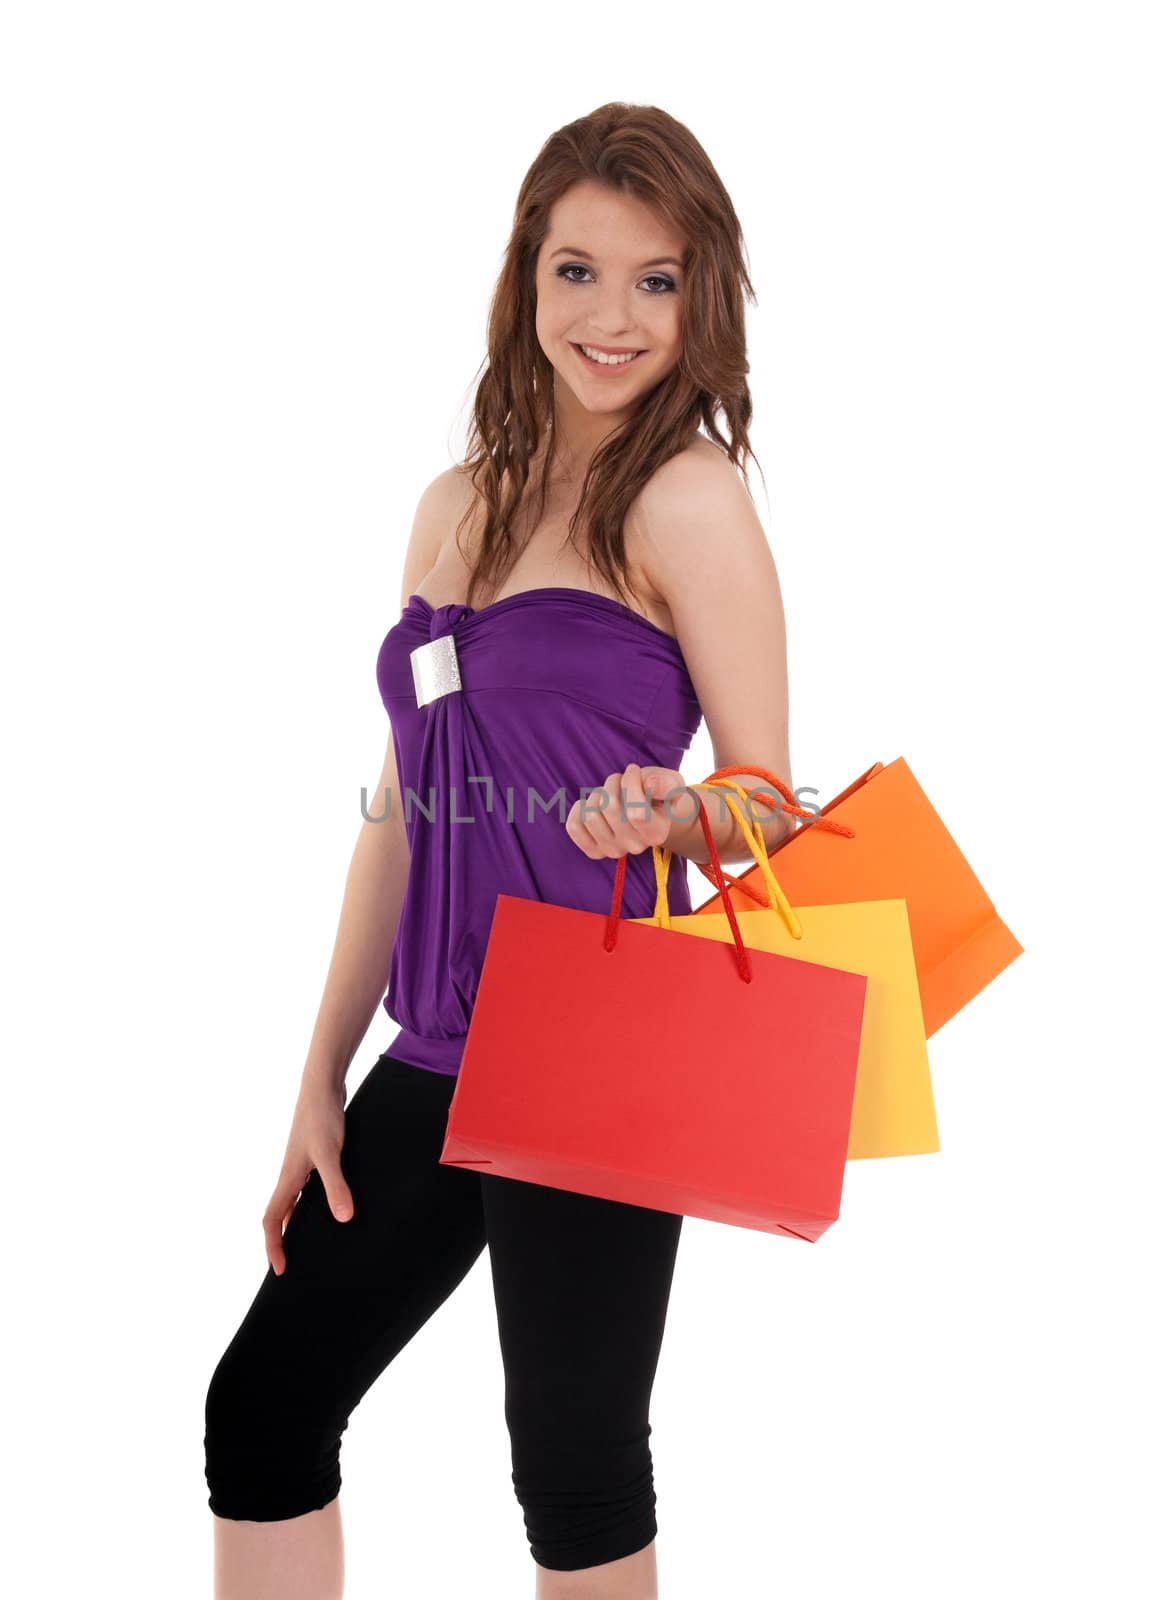 Smiling young girl holding colorful shopping bags, isolated on white.